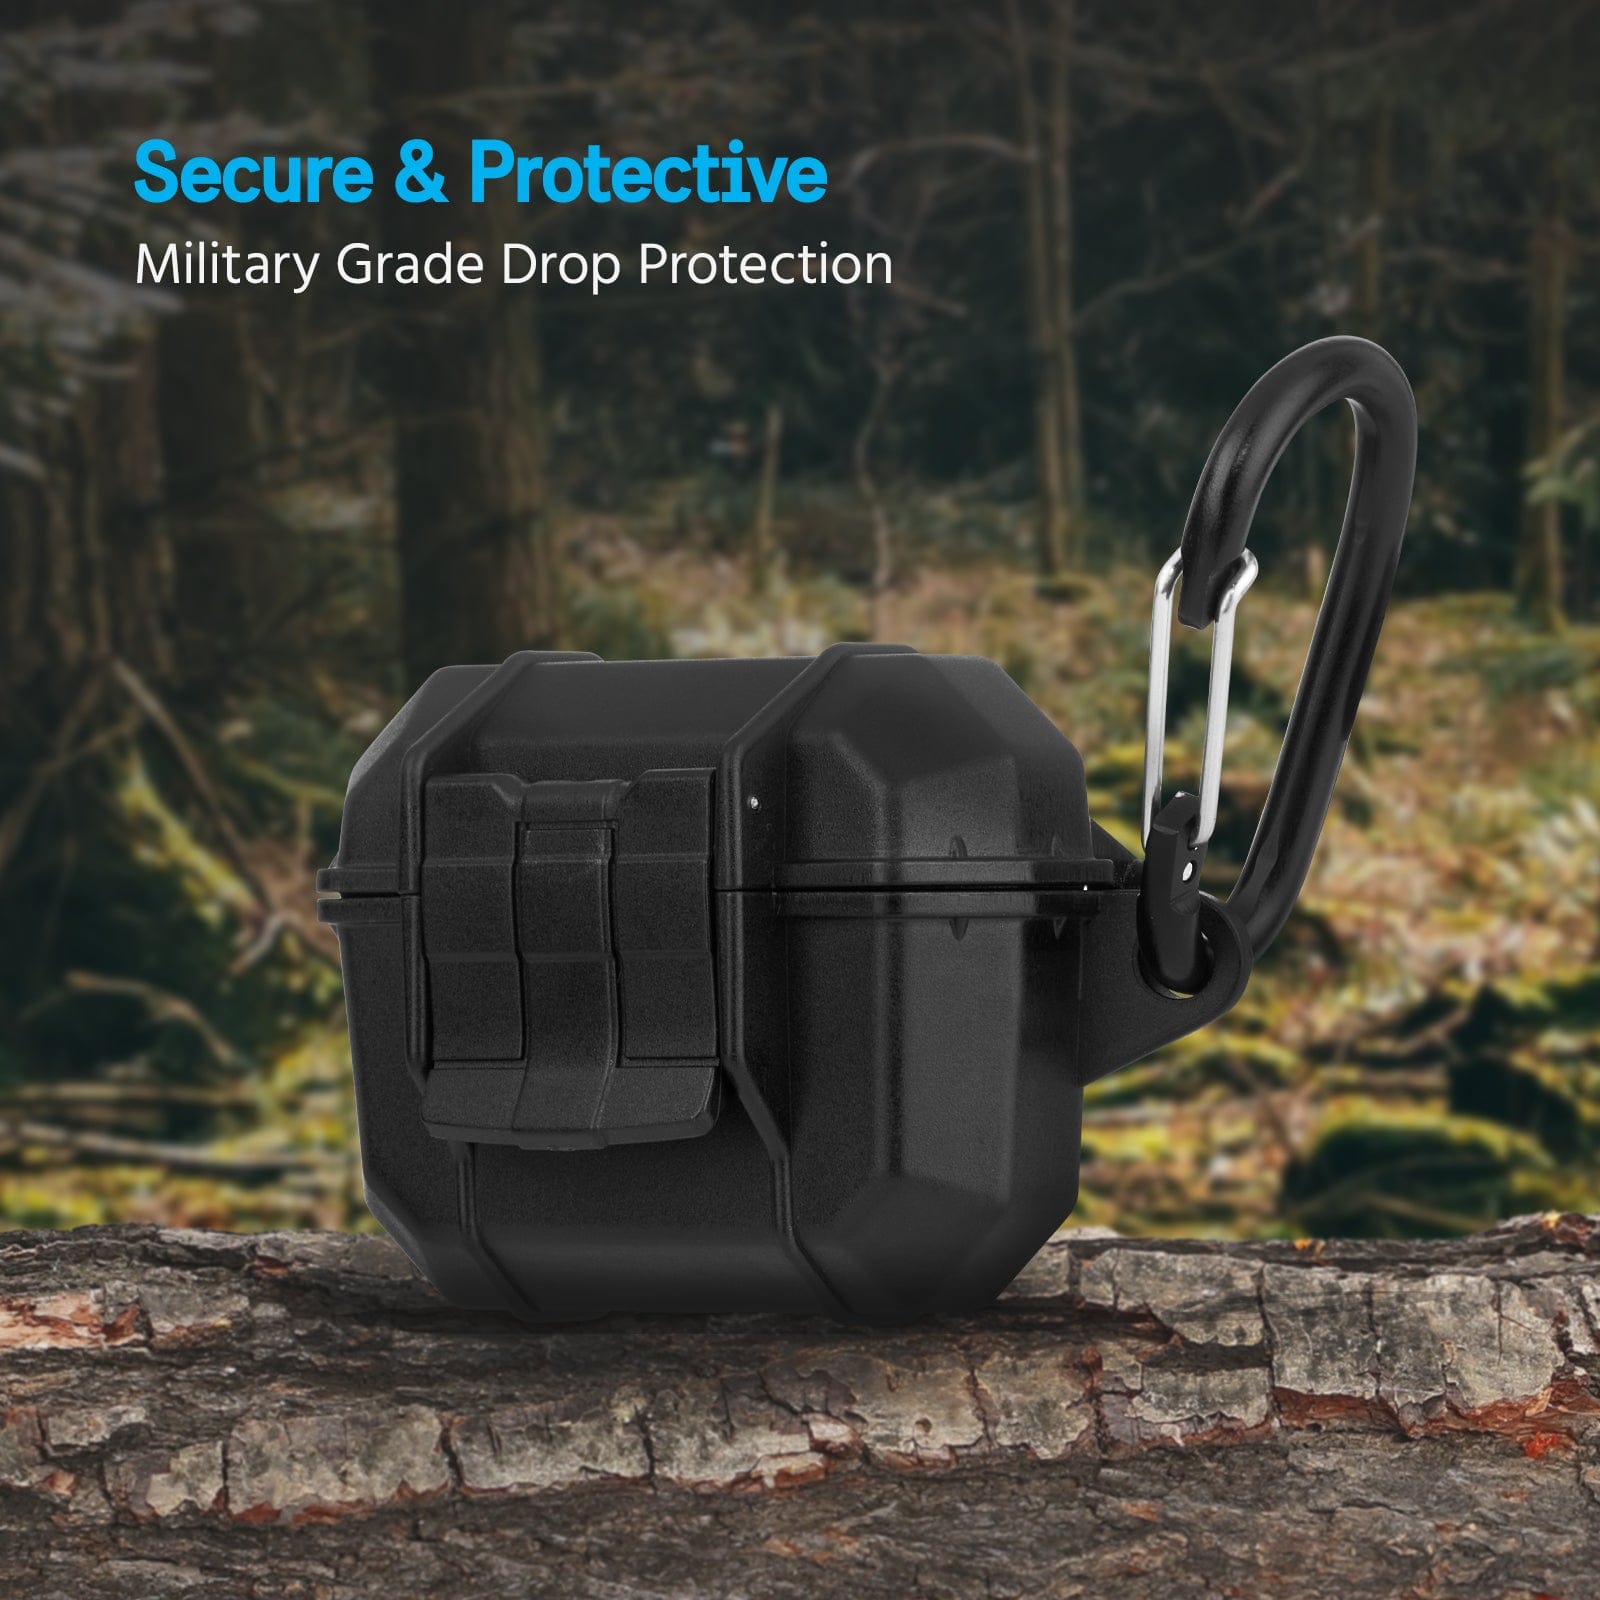 SECURE AND PROTECTIVE - MILITARY GRADE DROP PROTECTION